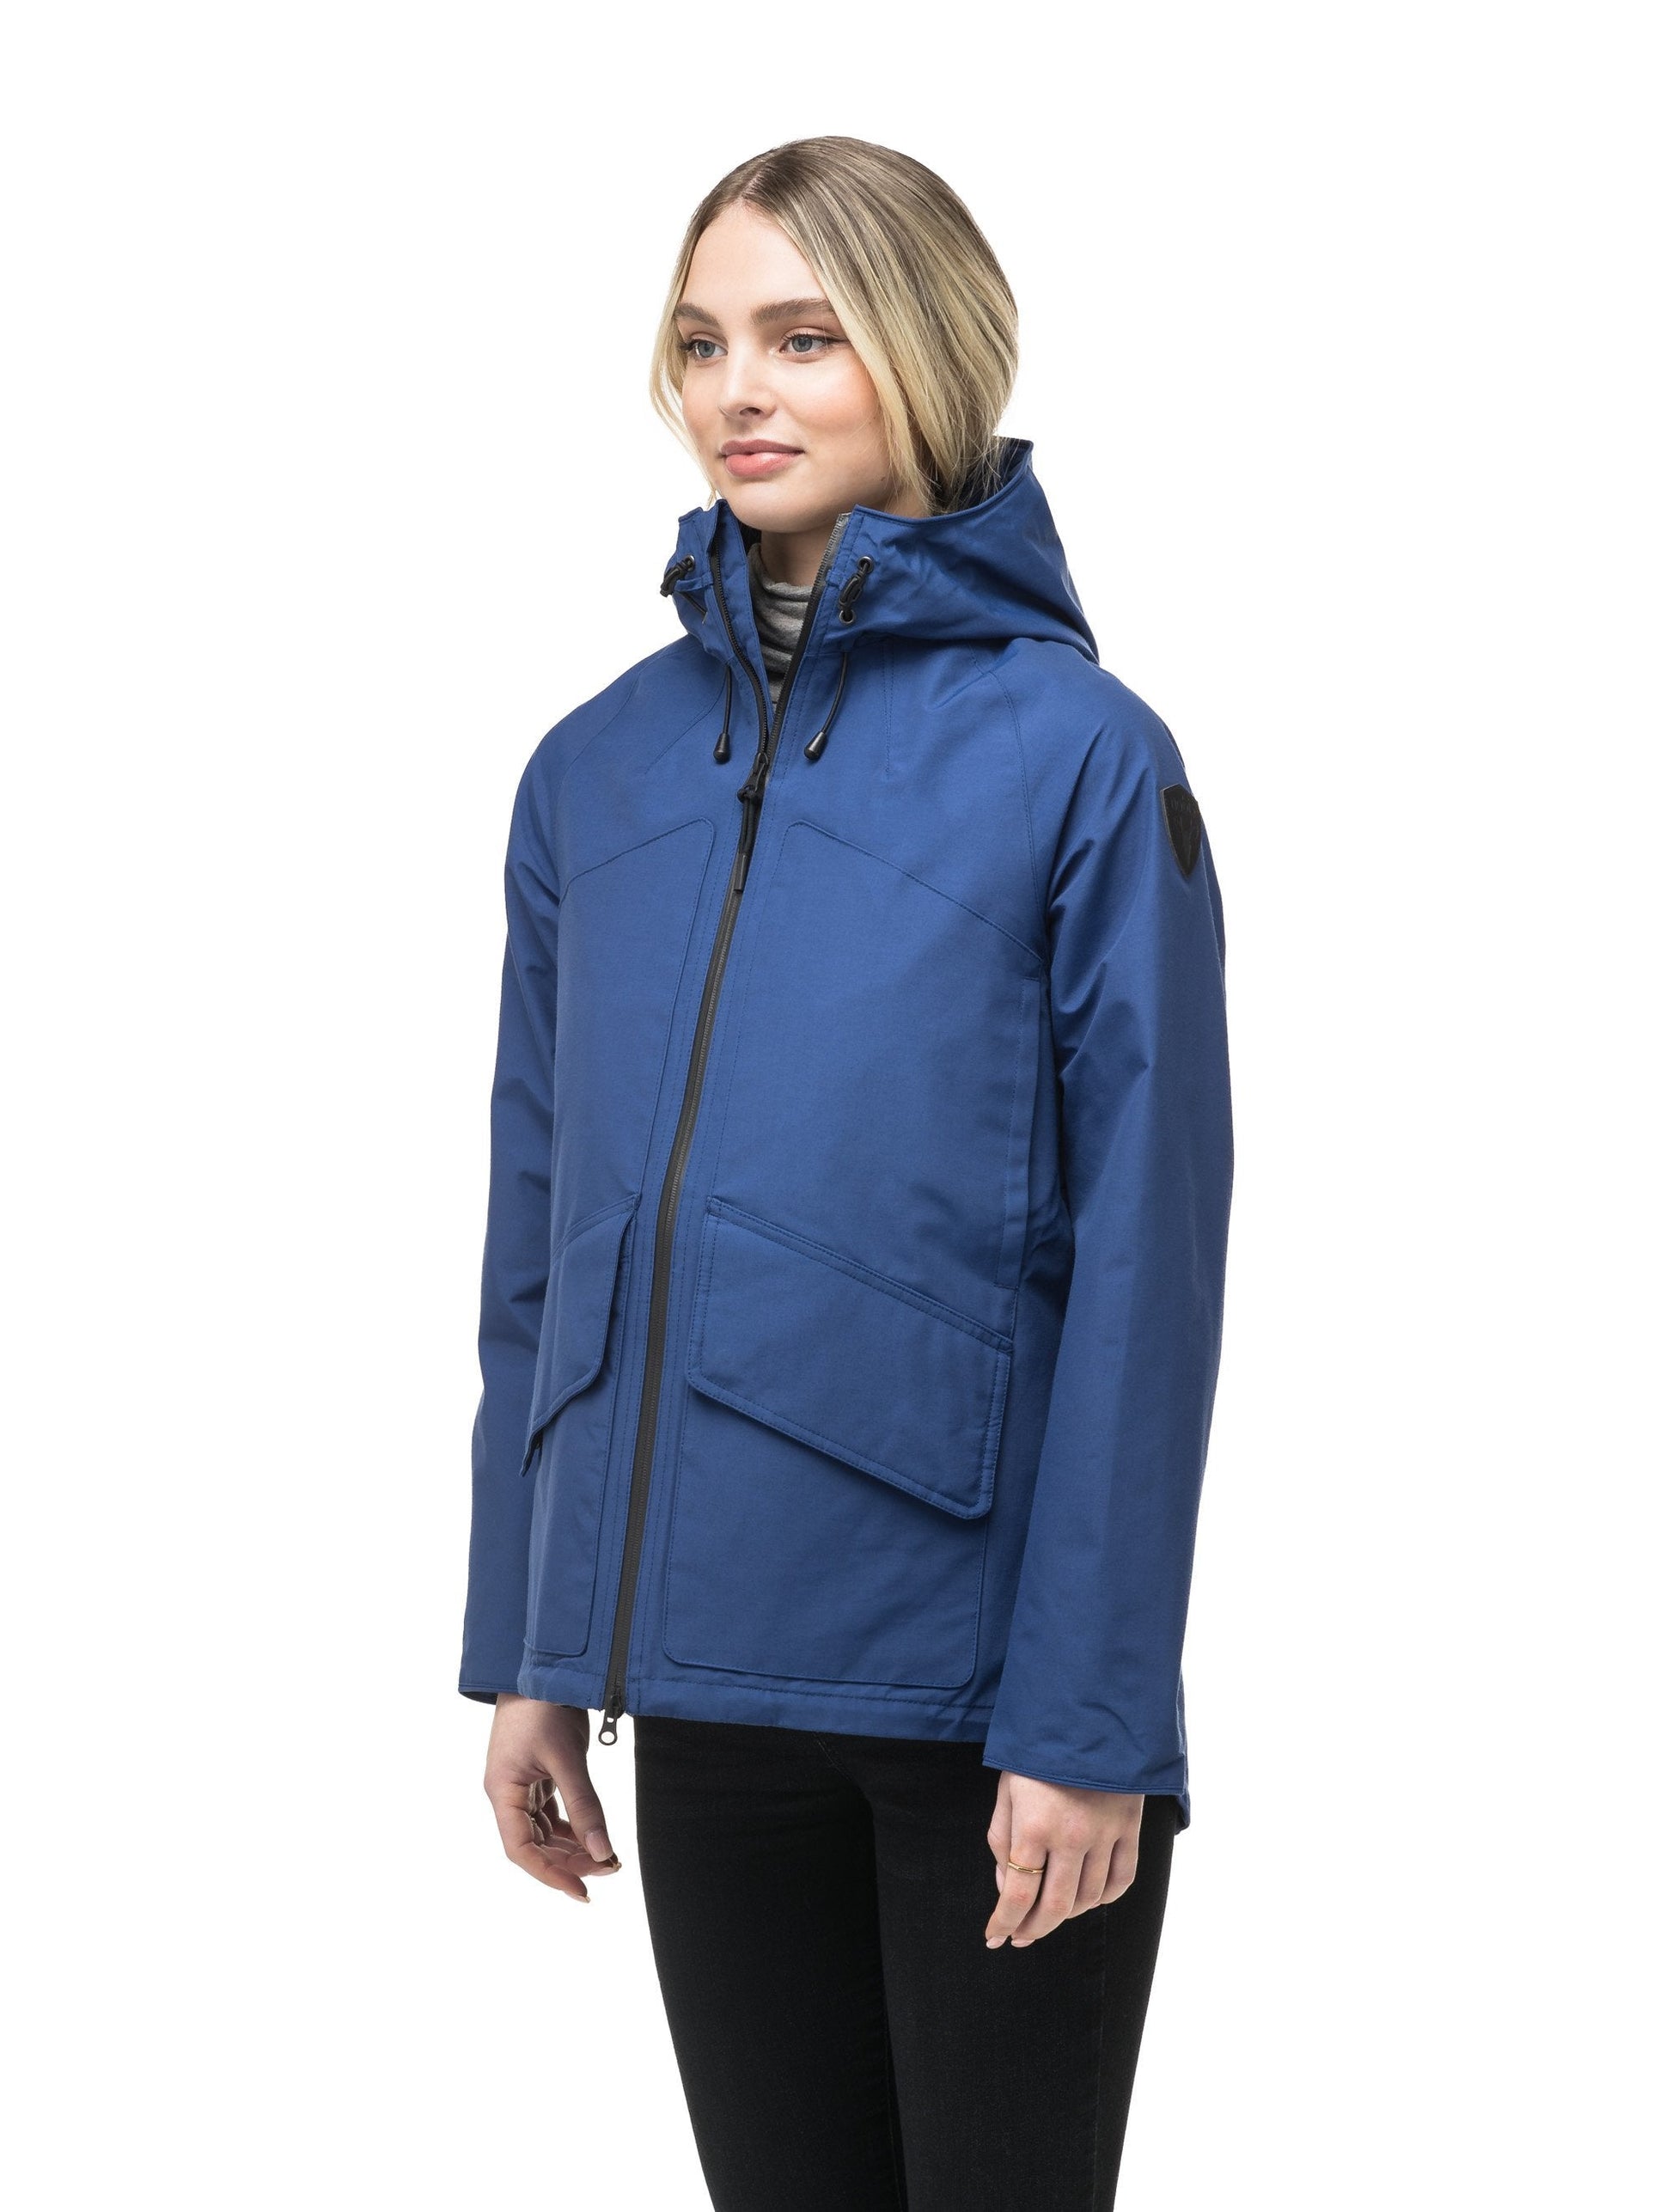 Women's hooded rain jacket with high low hem in Royal